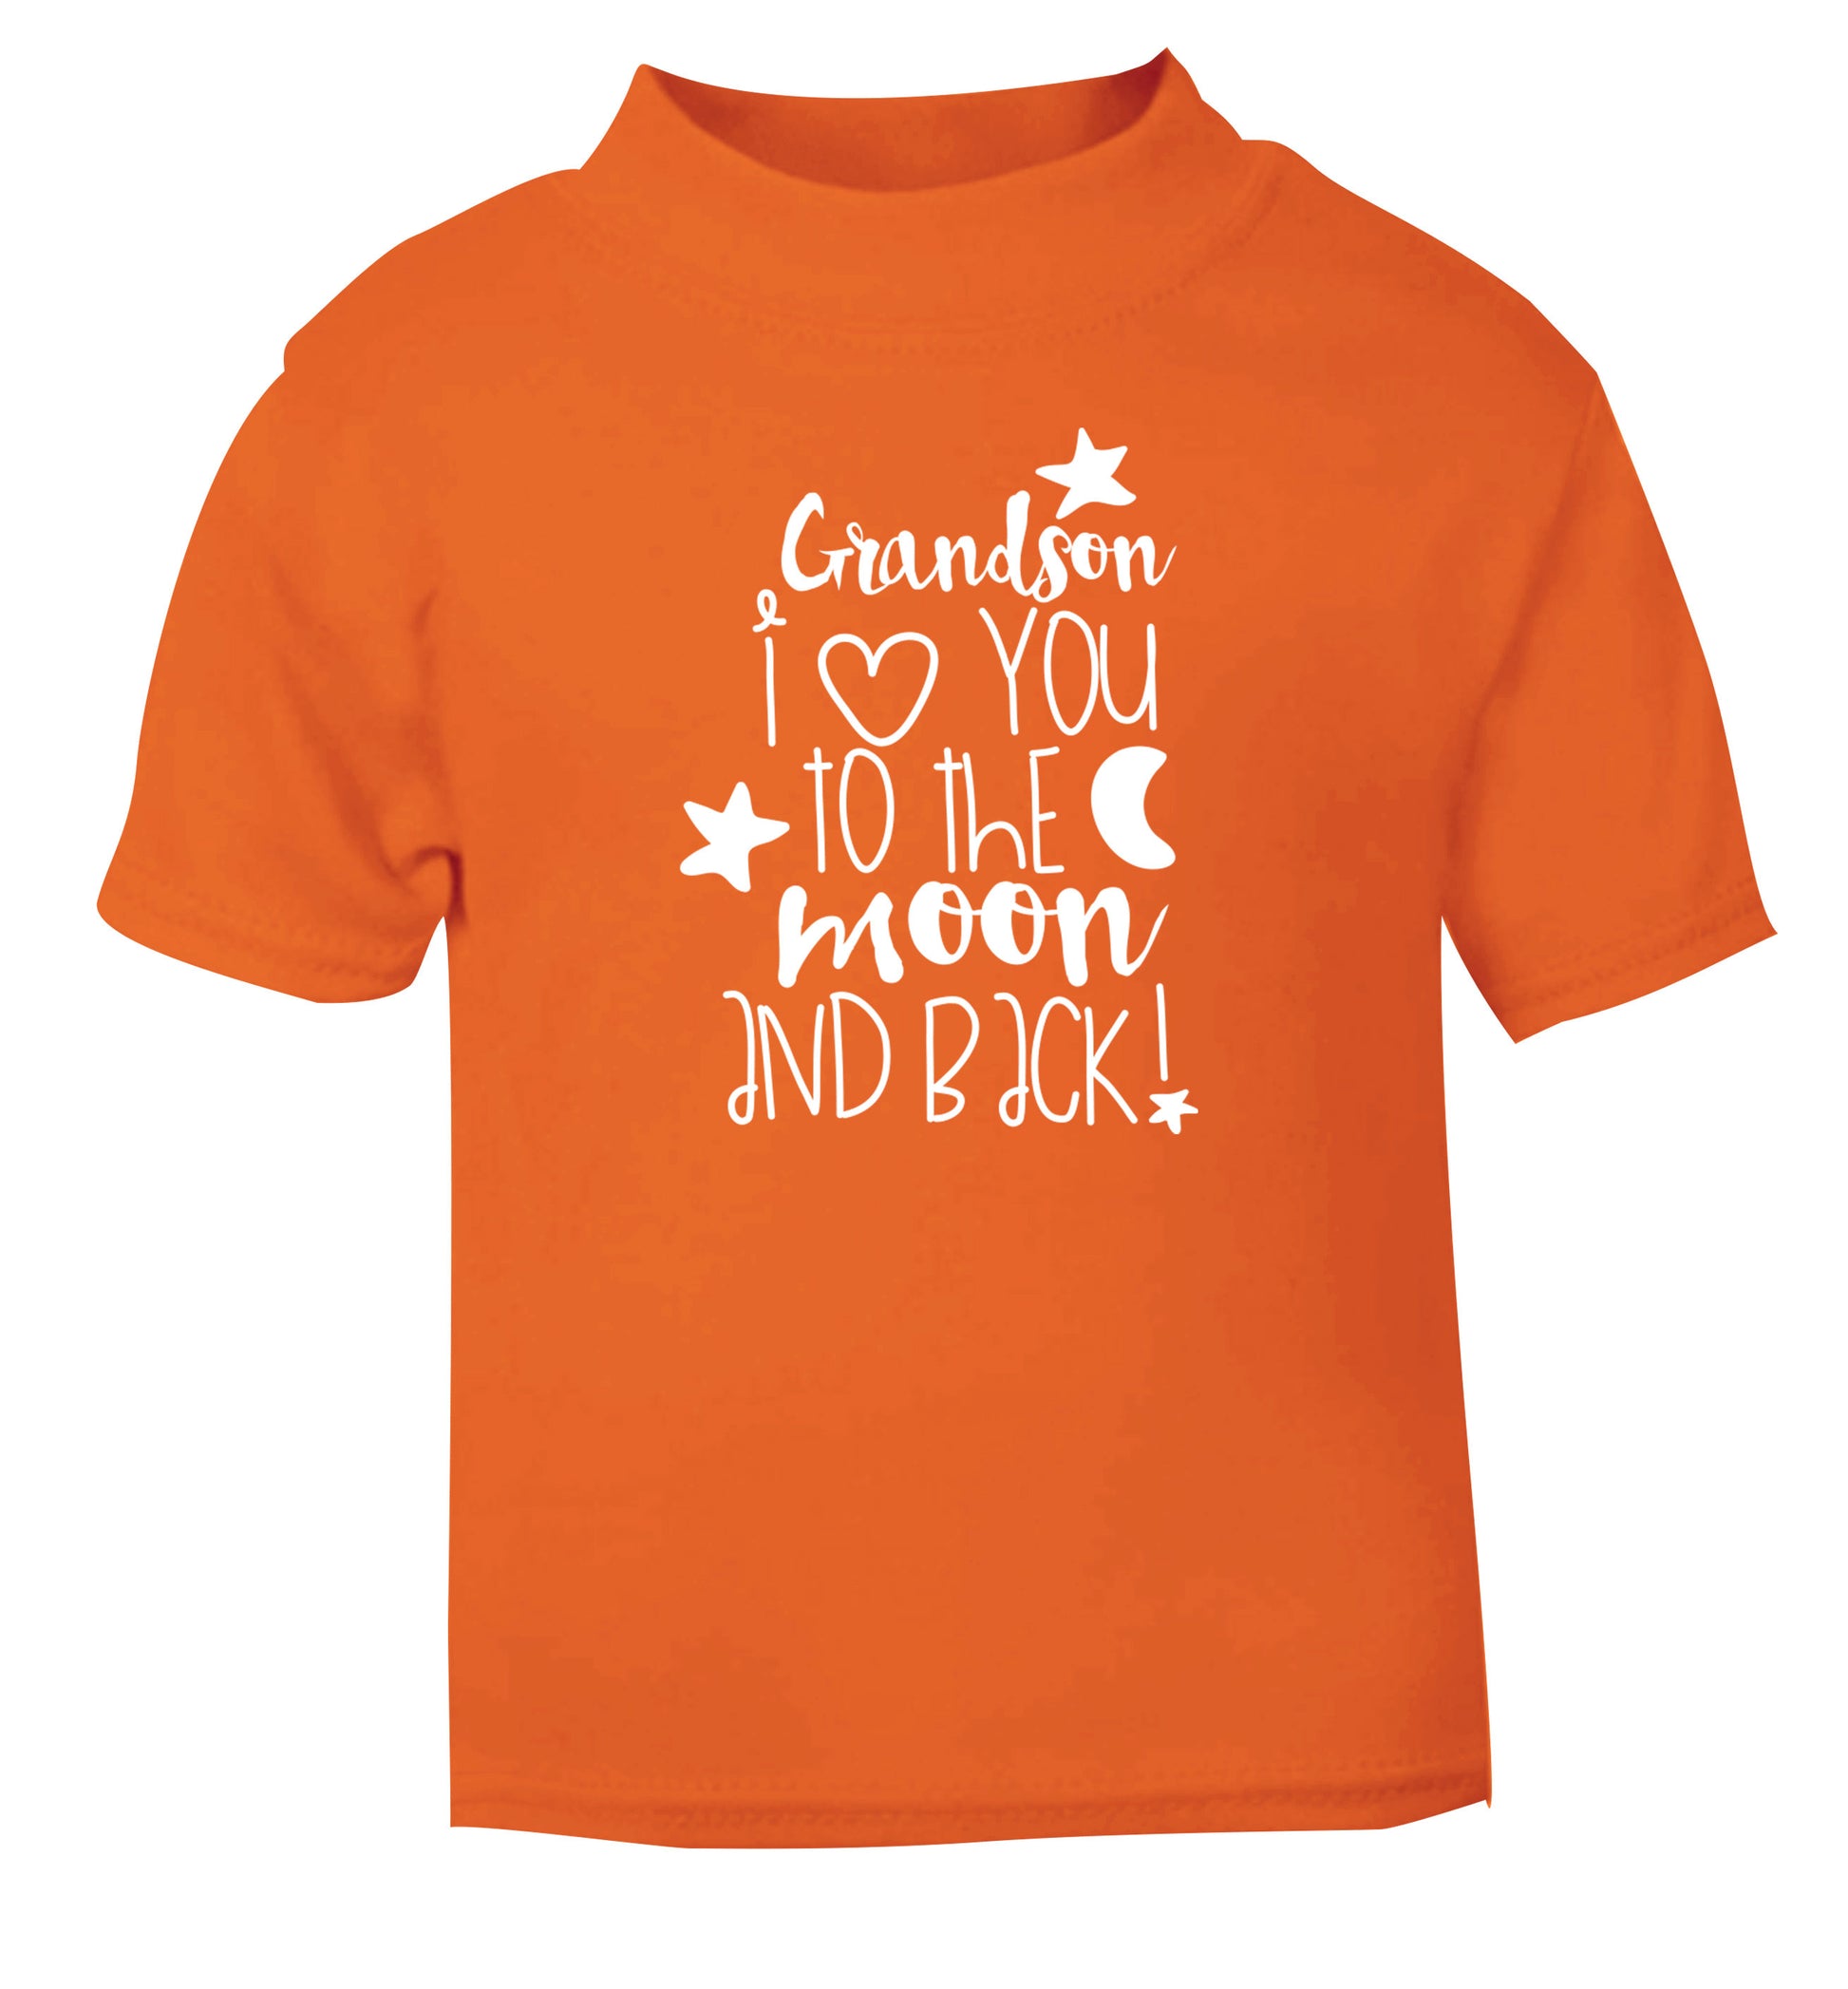 Grandson I love you to the moon and back orange Baby Toddler Tshirt 2 Years